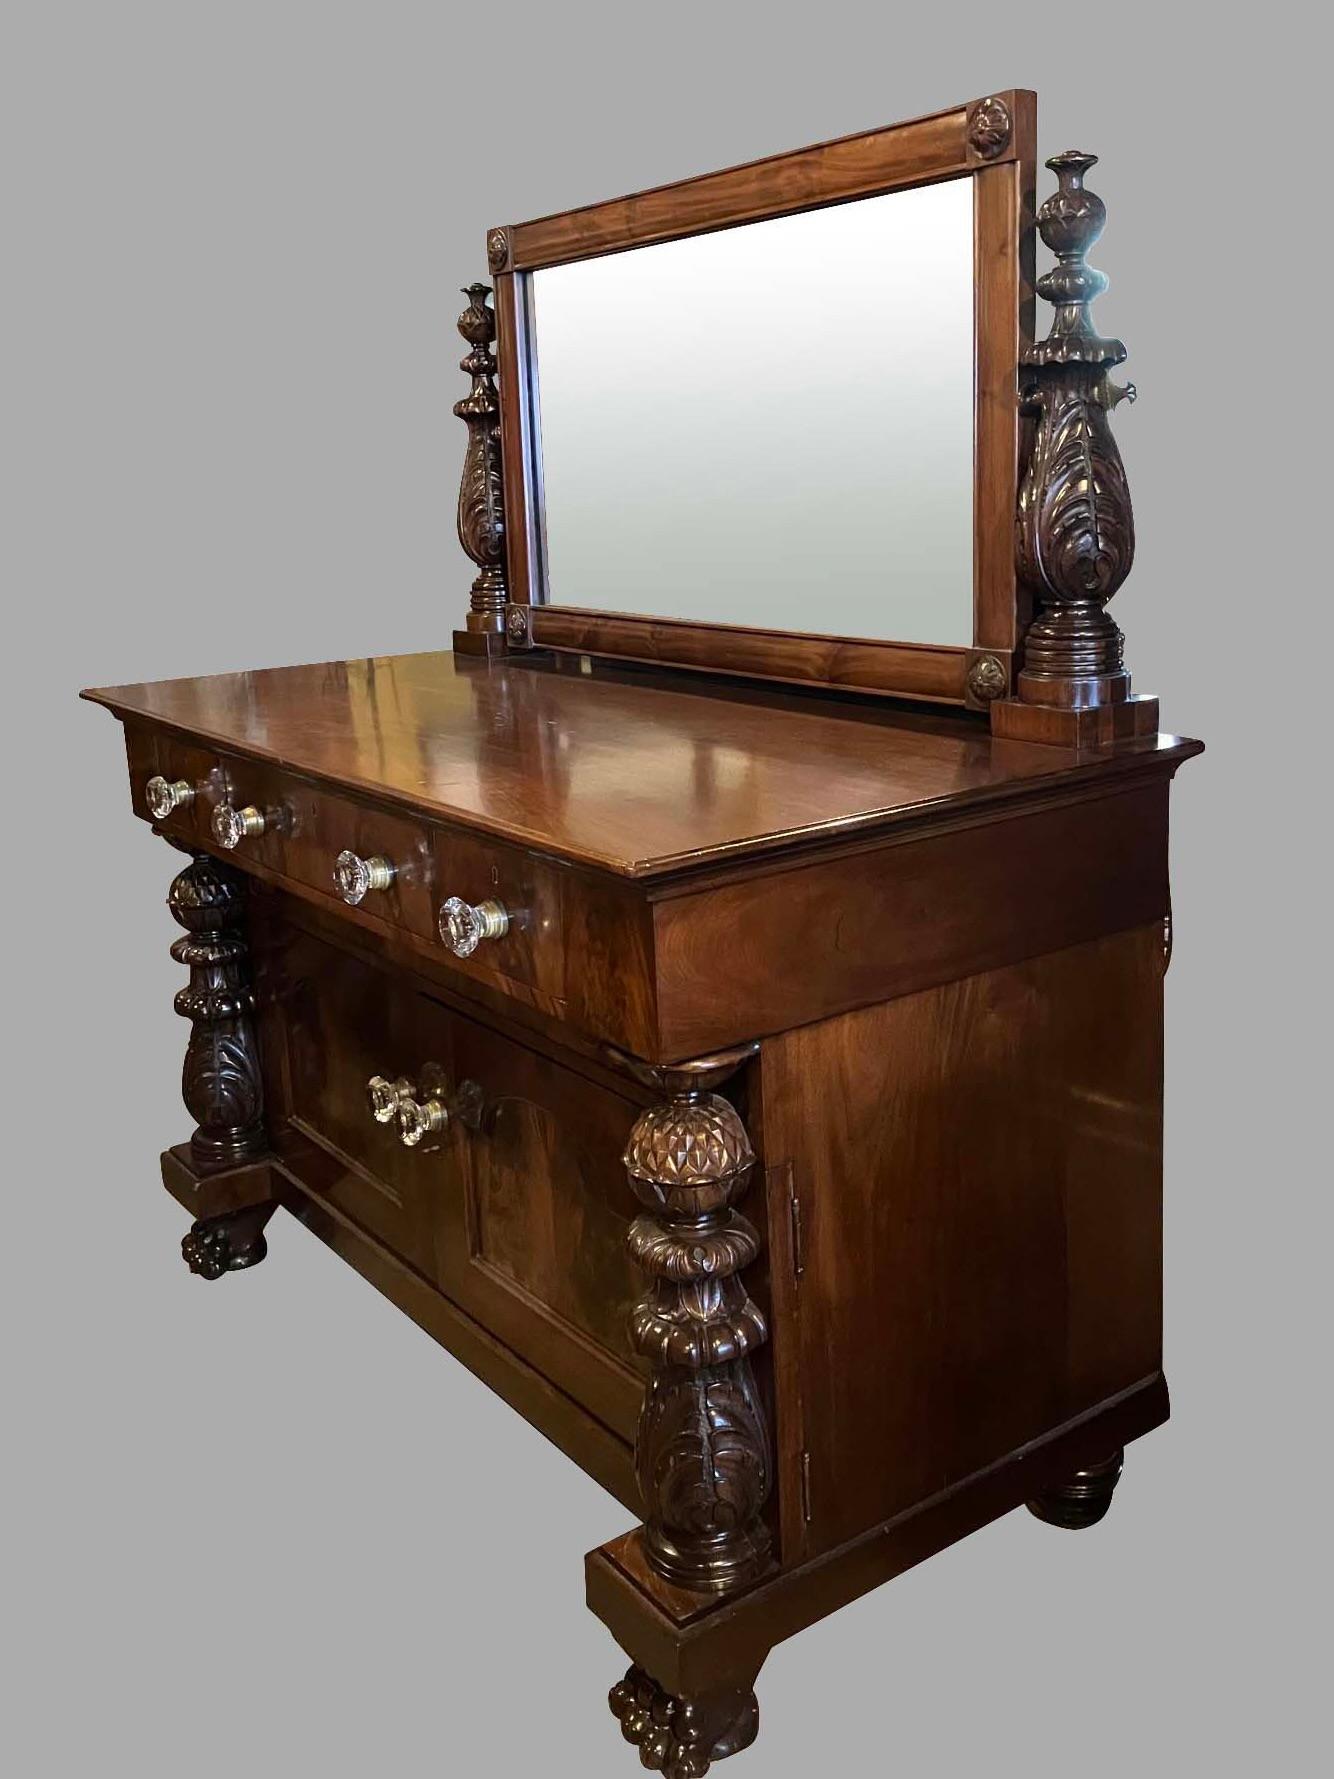 Large American Empire Revival Mahogany Dressing Chest with Adjustable Mirror In Good Condition For Sale In San Francisco, CA